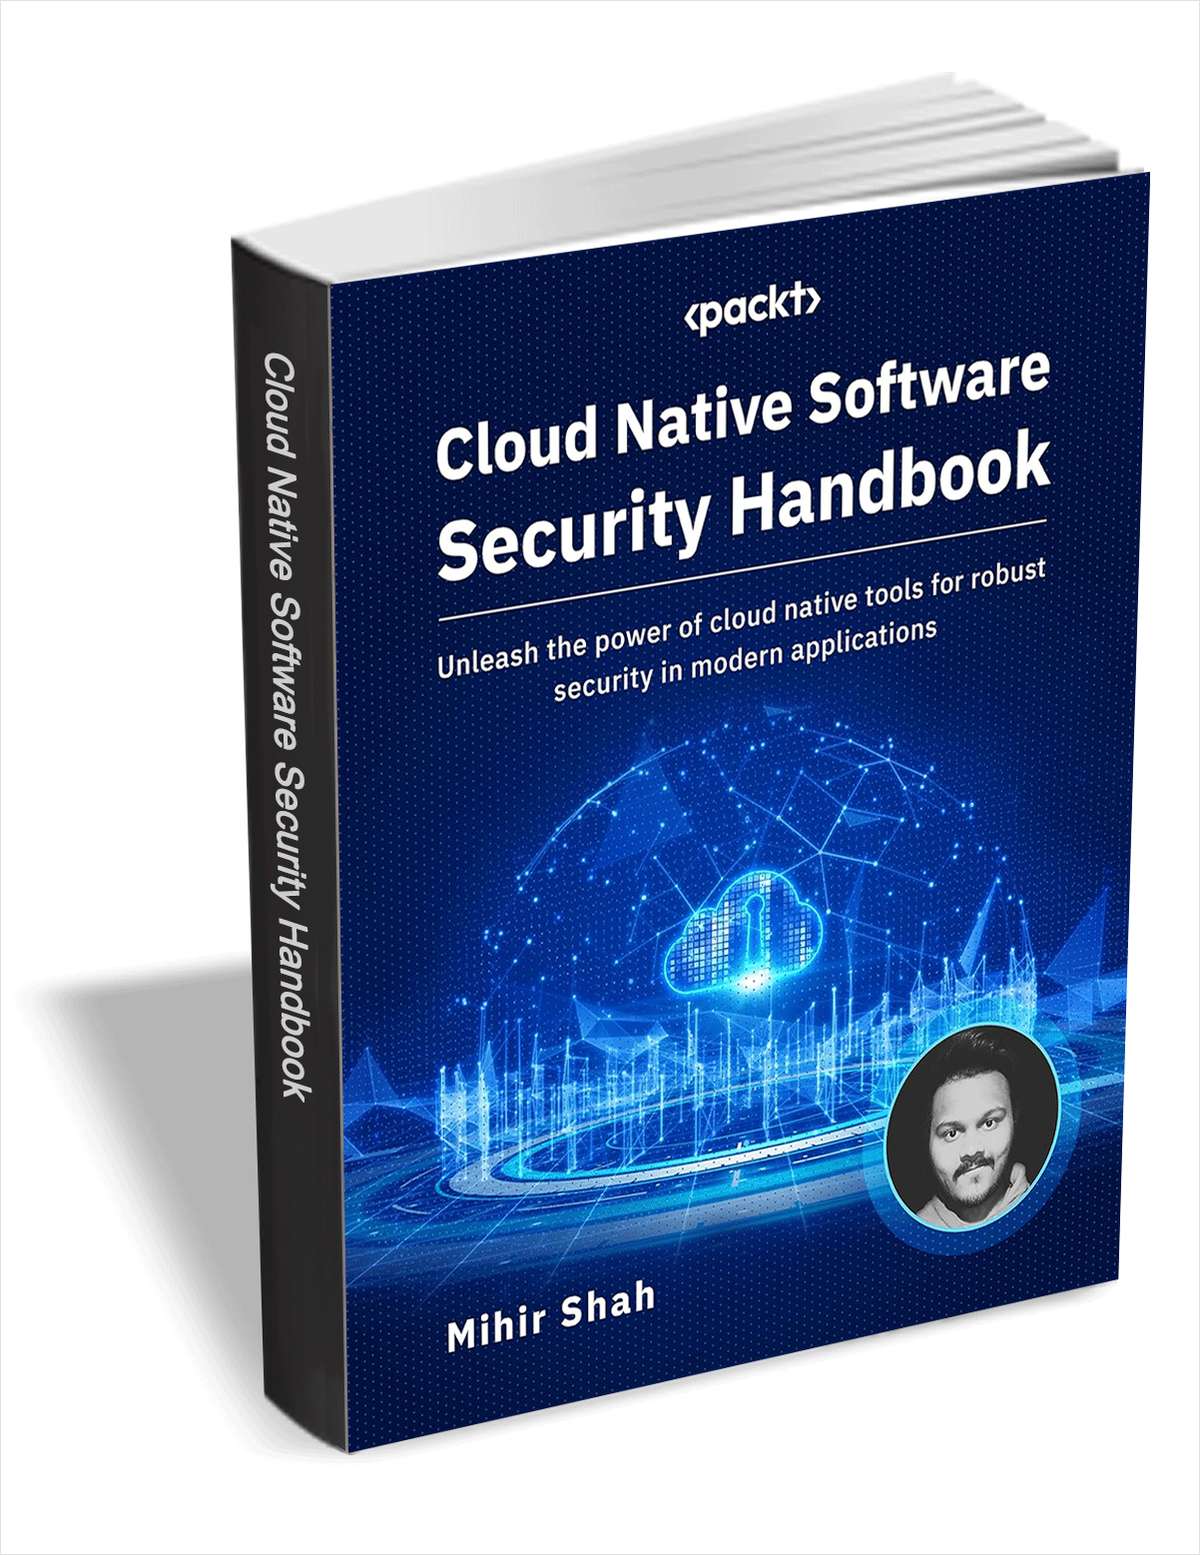 Cloud Native Software Security Handbook (35.99 Value) FREE for a